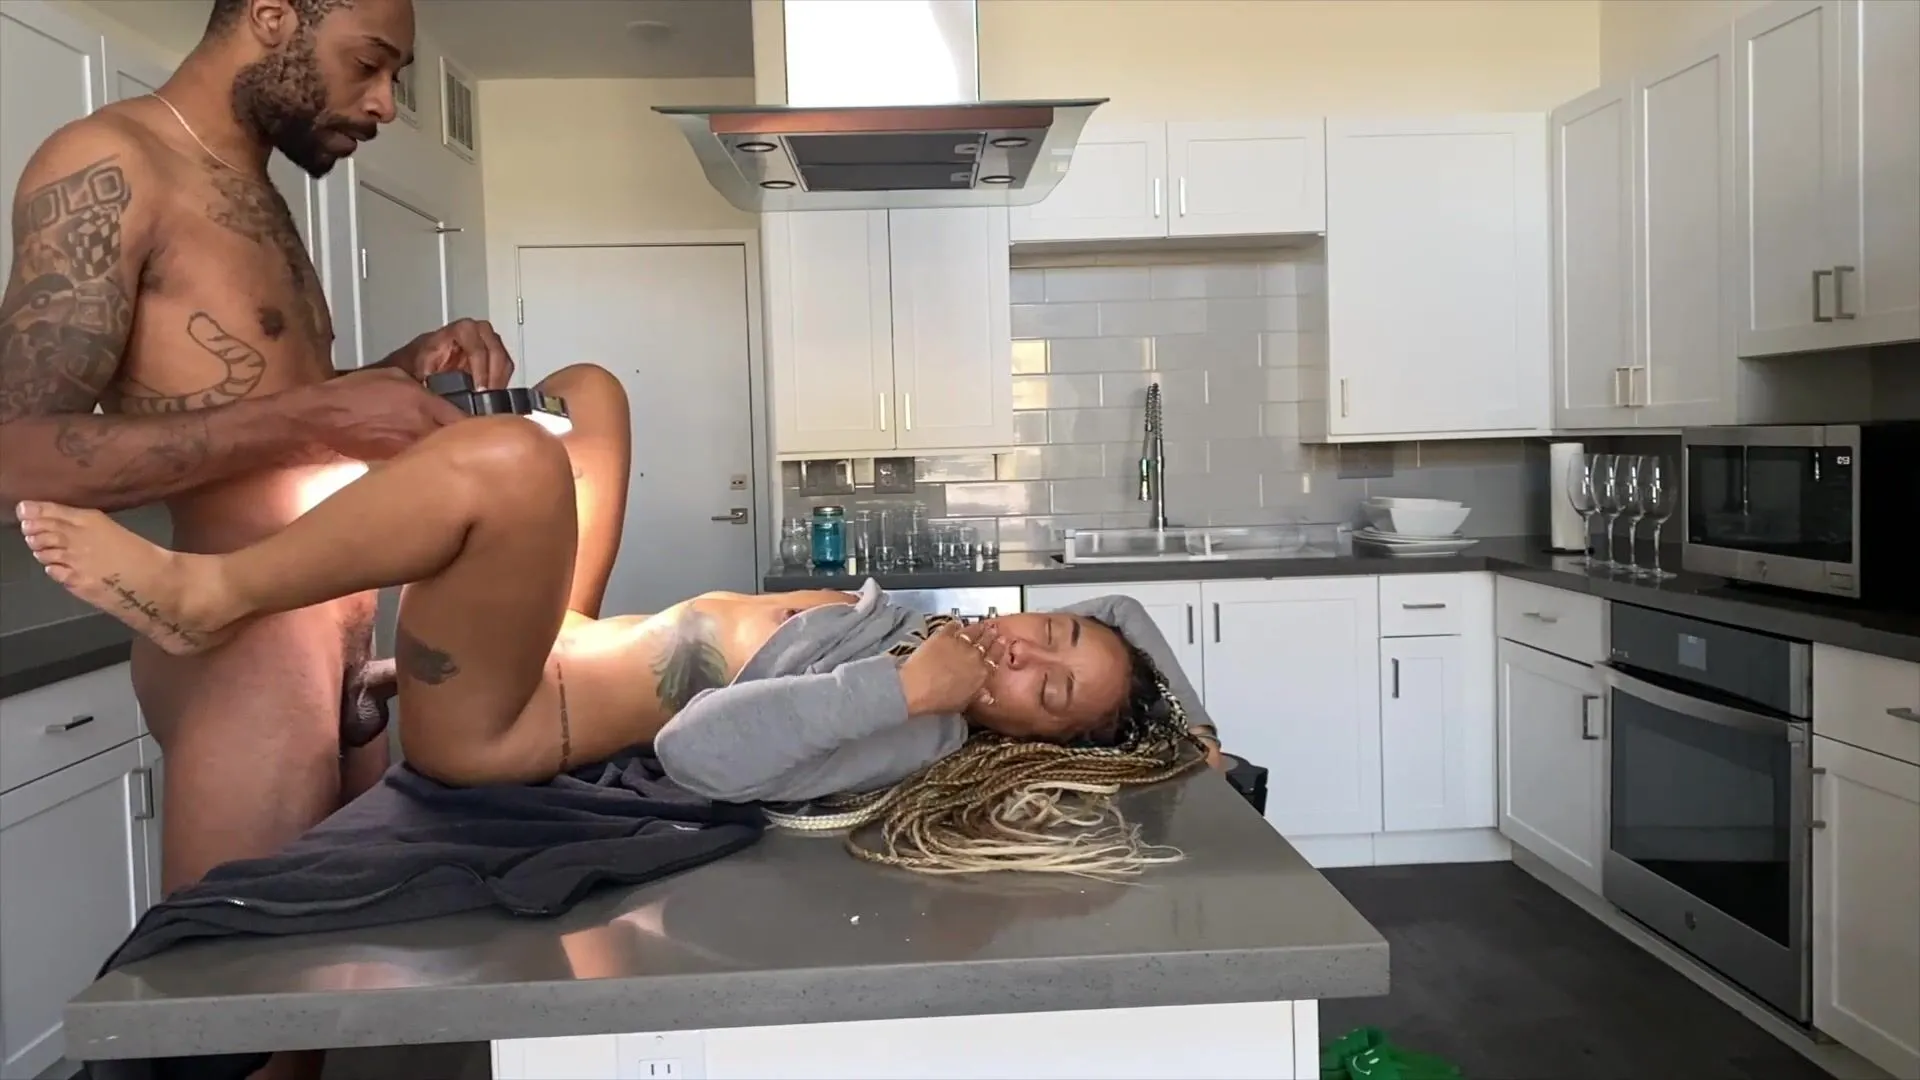 In The Kitchen - Free Black Coarse Kitchen Sex (Full On RED) Porn Video - Ebony 8